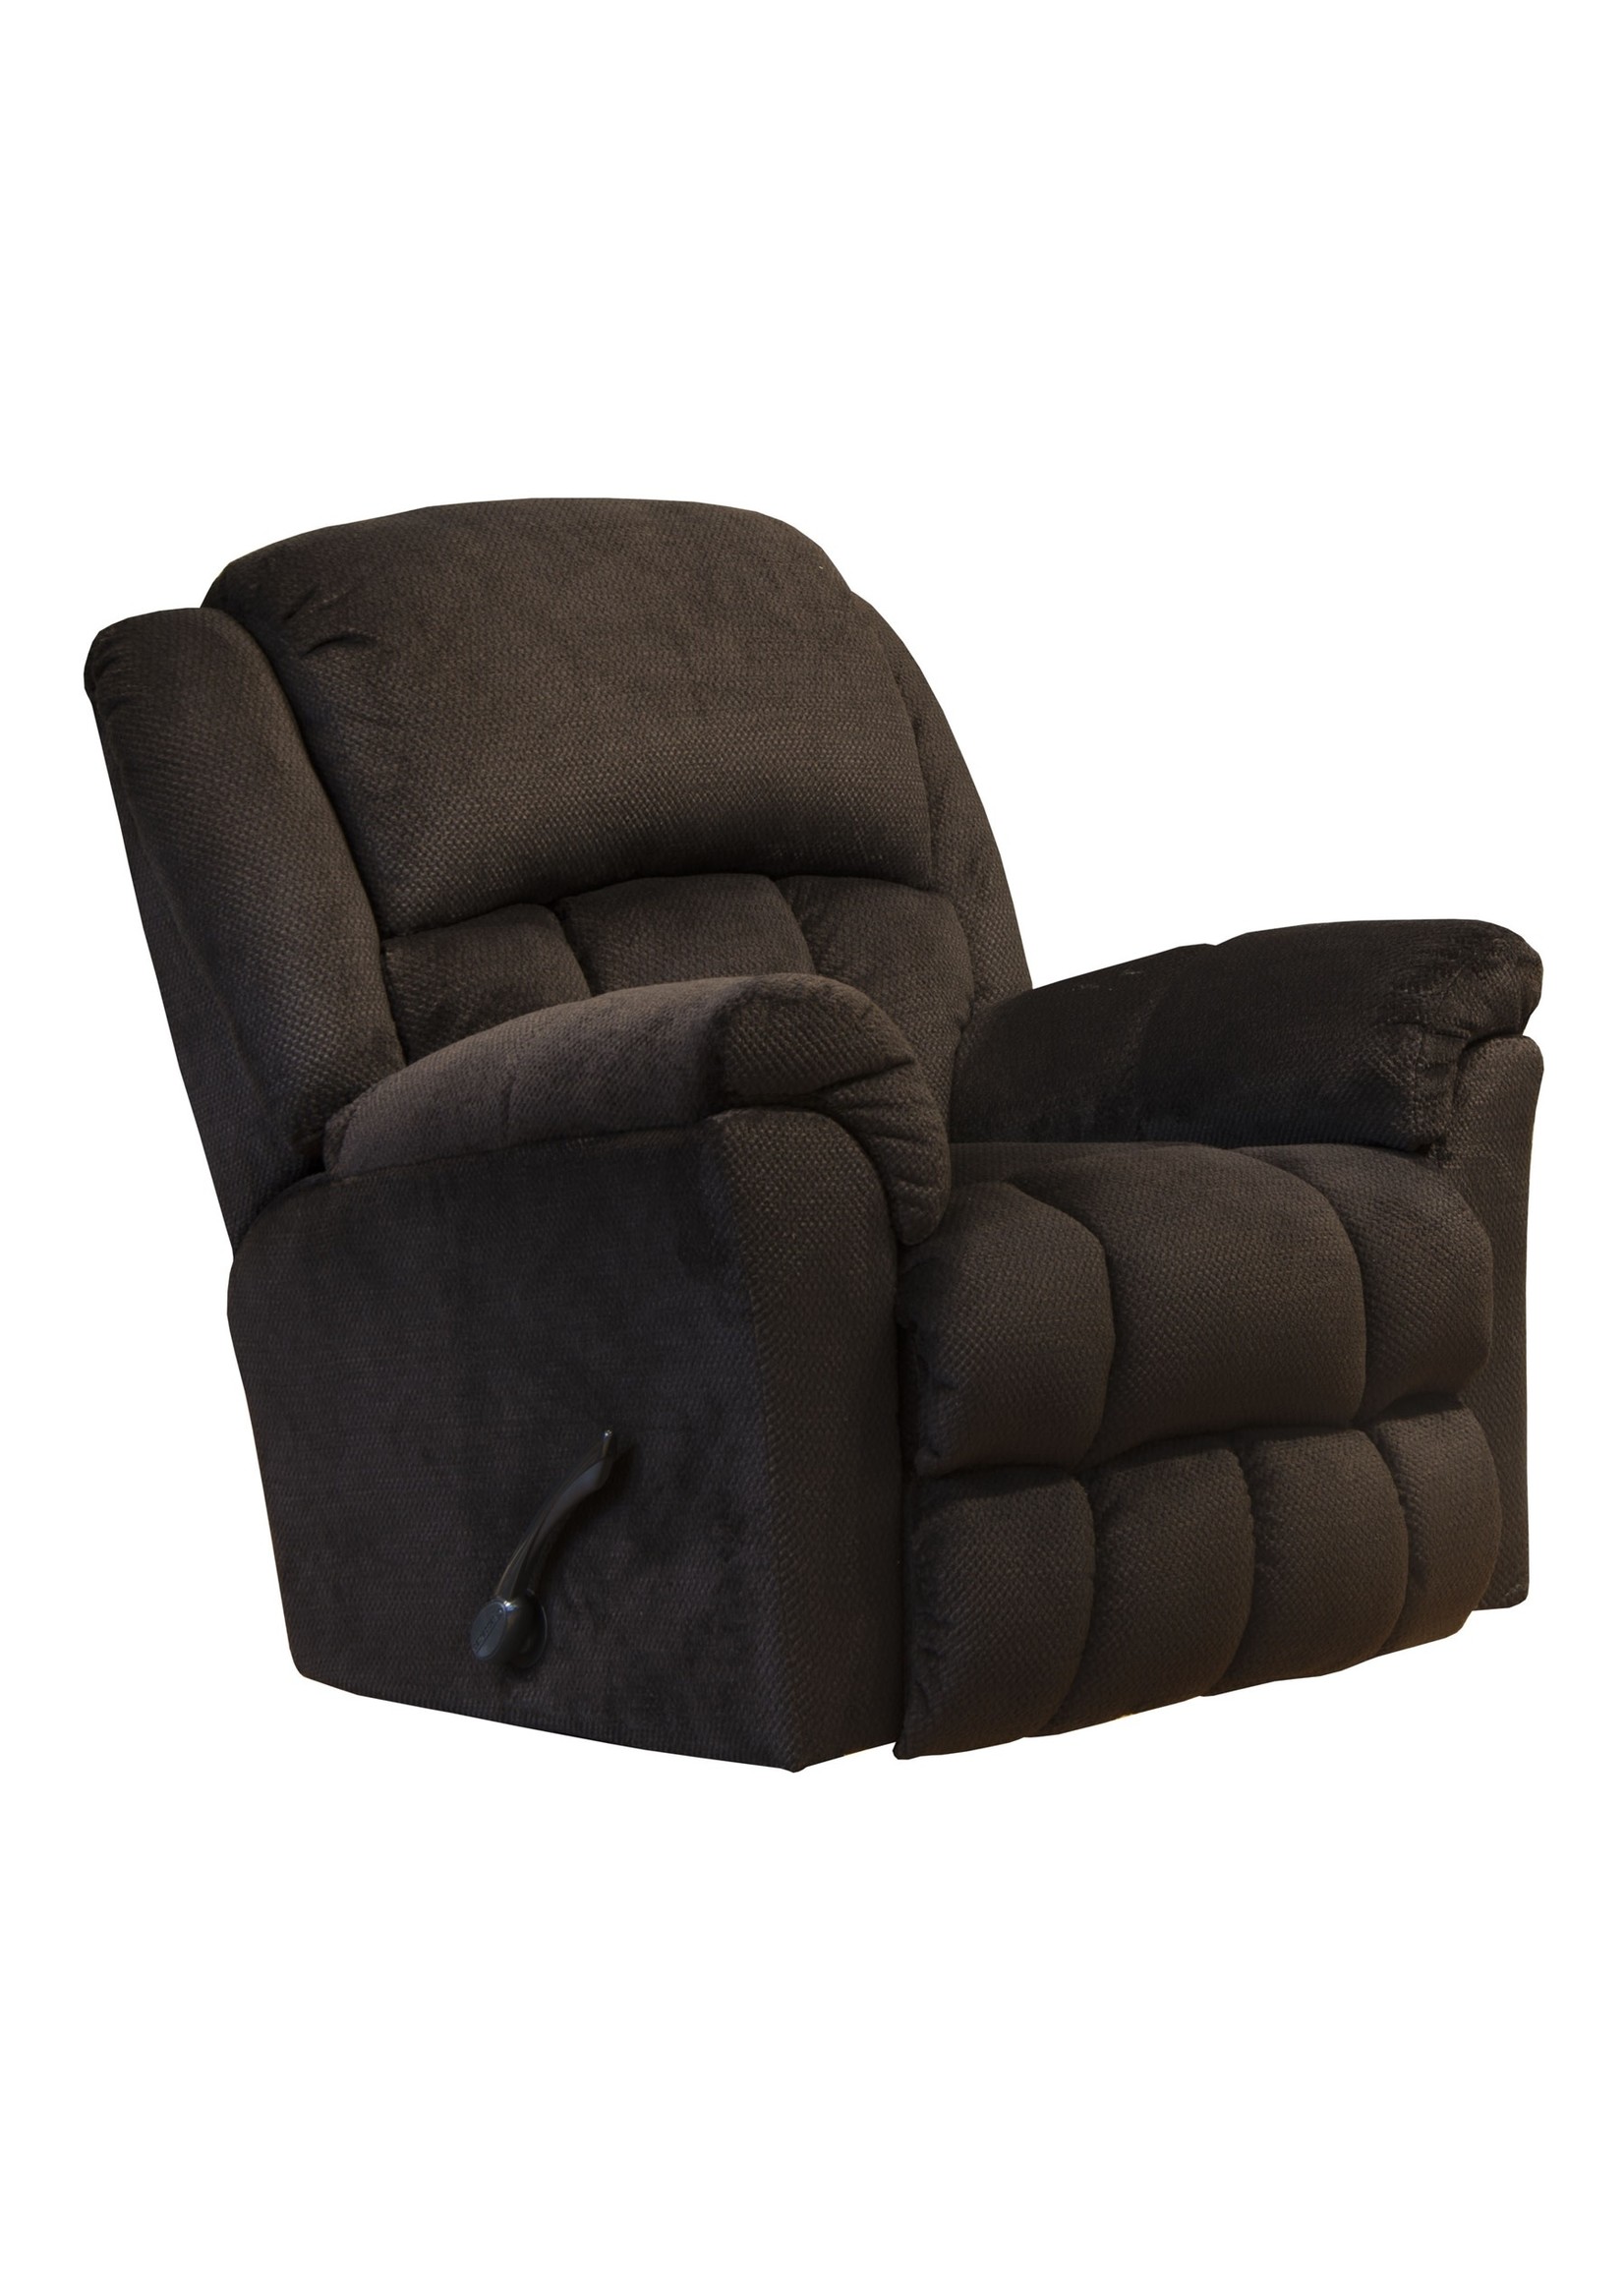 CATNAPPER 4211 BINGHAM CHOCOLATE RECLINER WITH HEAT AND MASSAGE